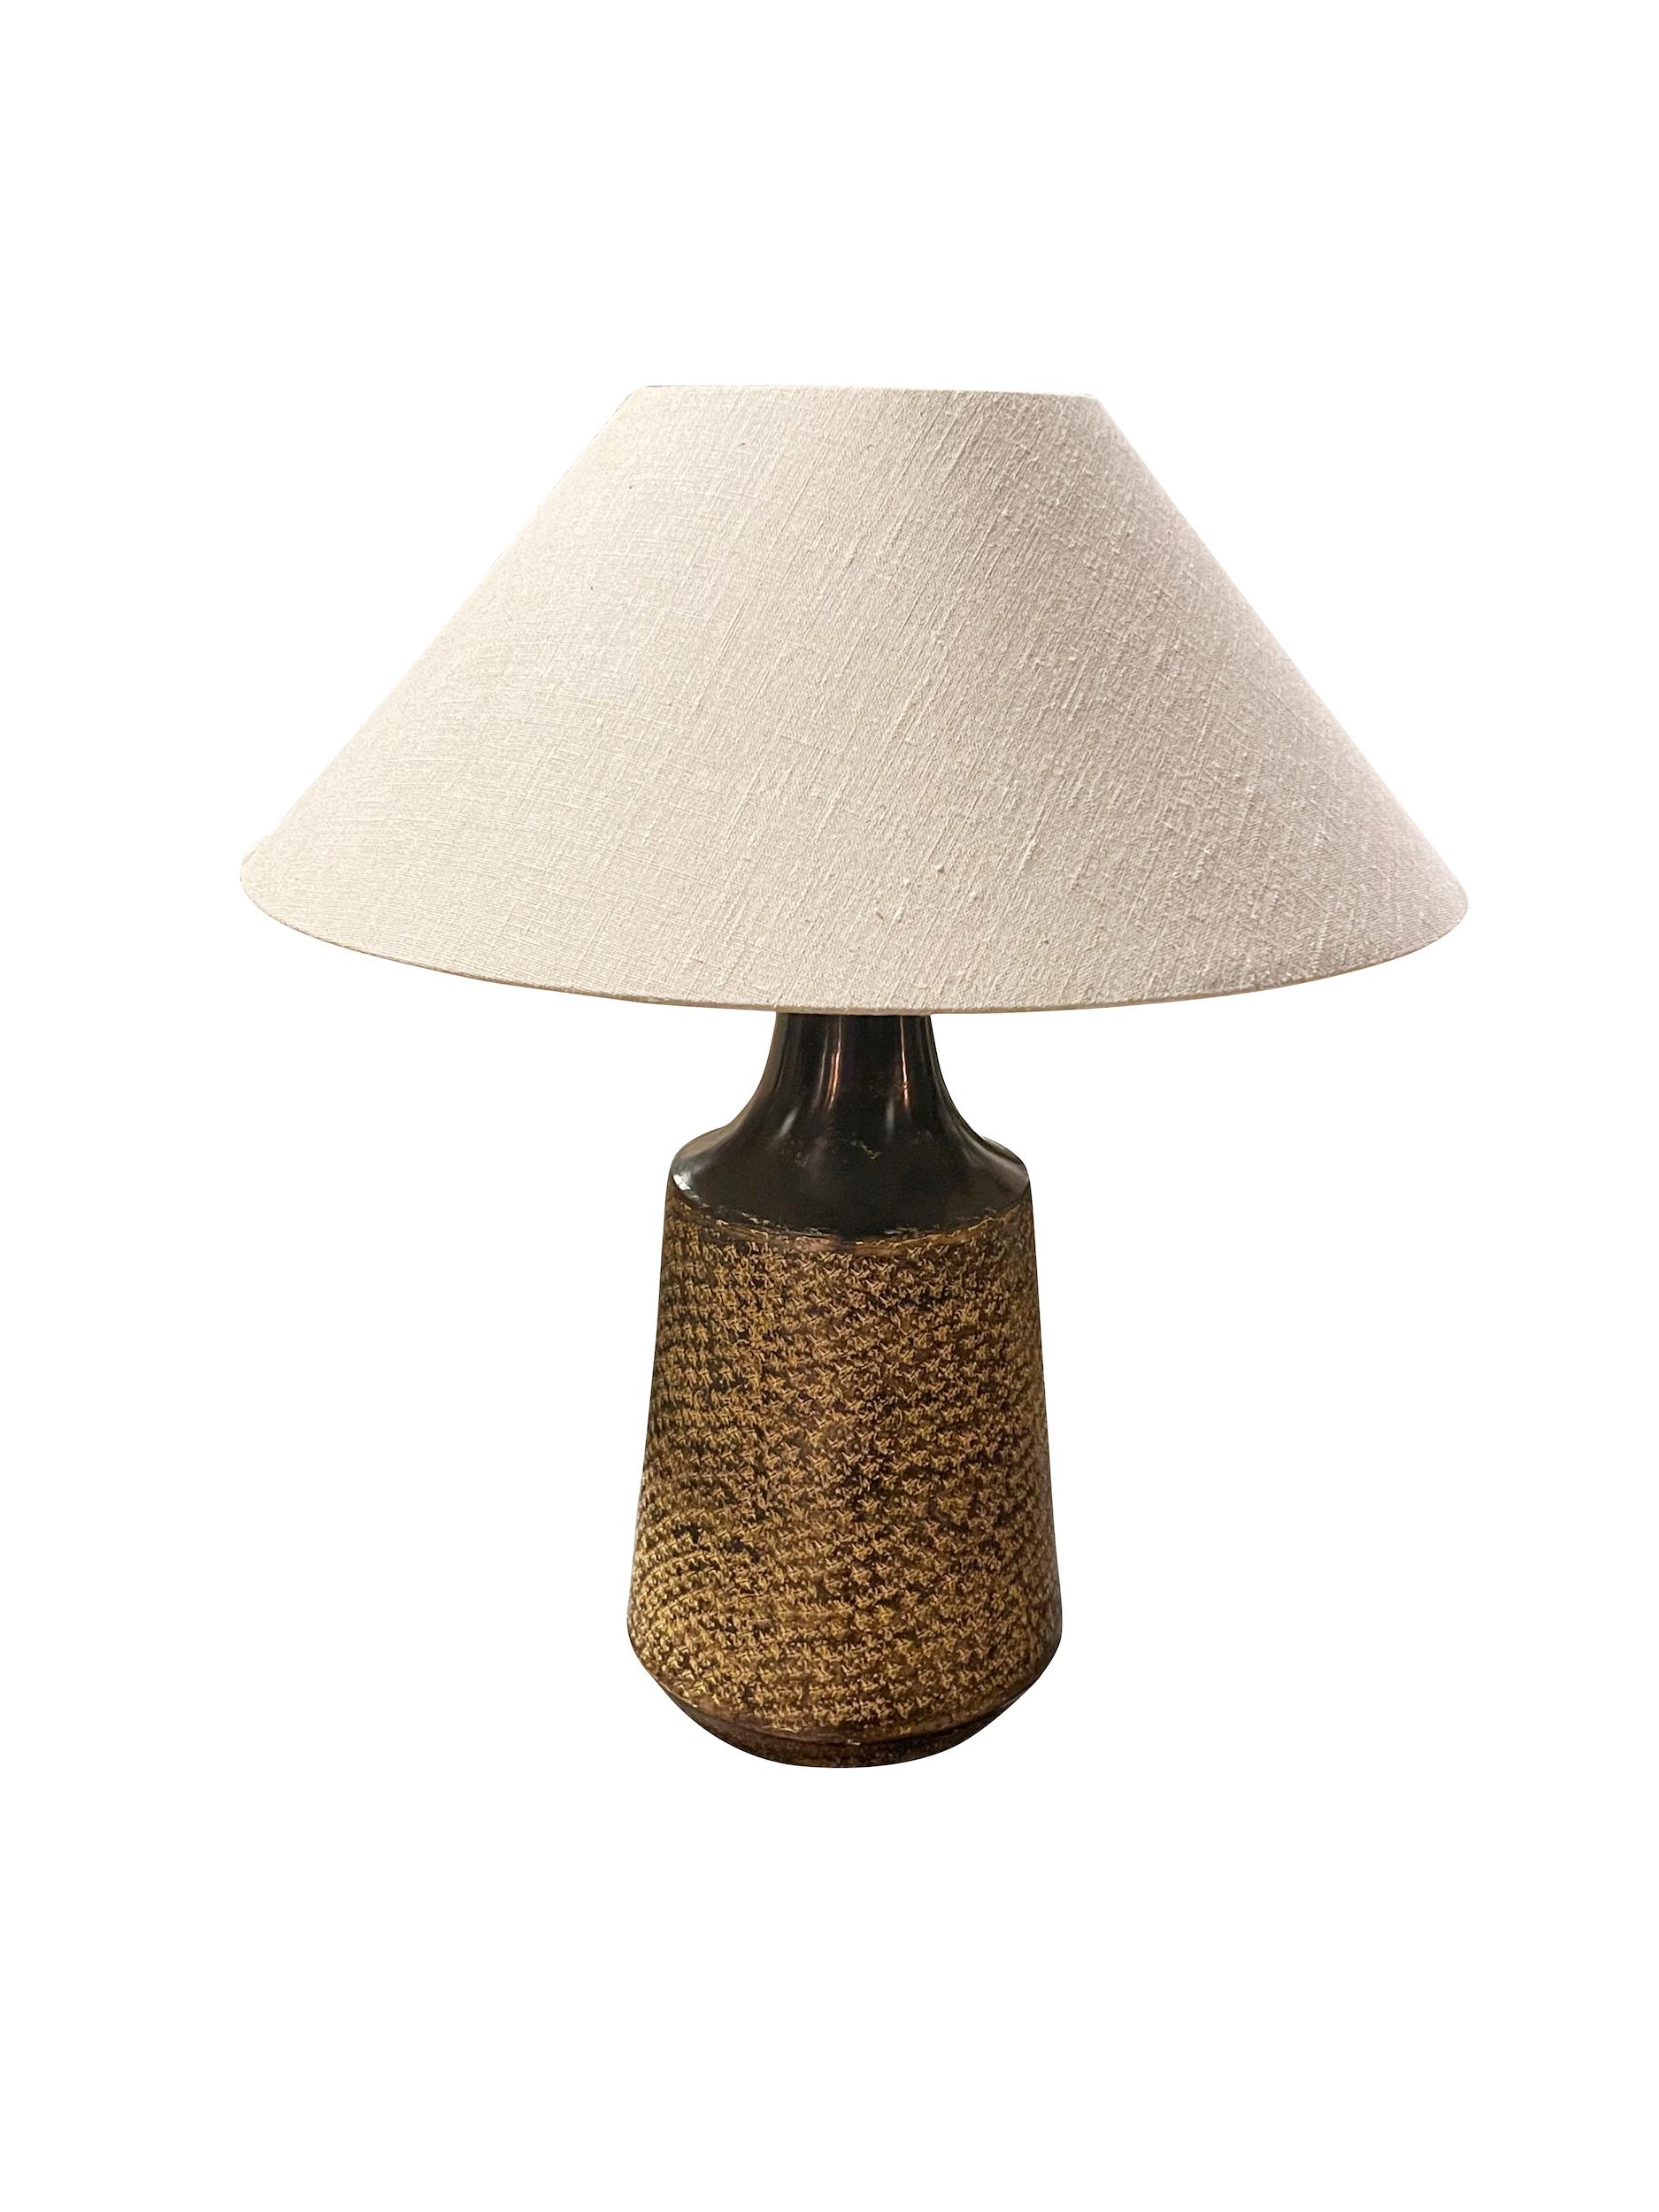 Contemporary Chinese pair textured metal lamps.
Top of base has mottled decorative pattern design.
Bottom of base is solid.
Belgian linen shades included.
Shade diameter 21